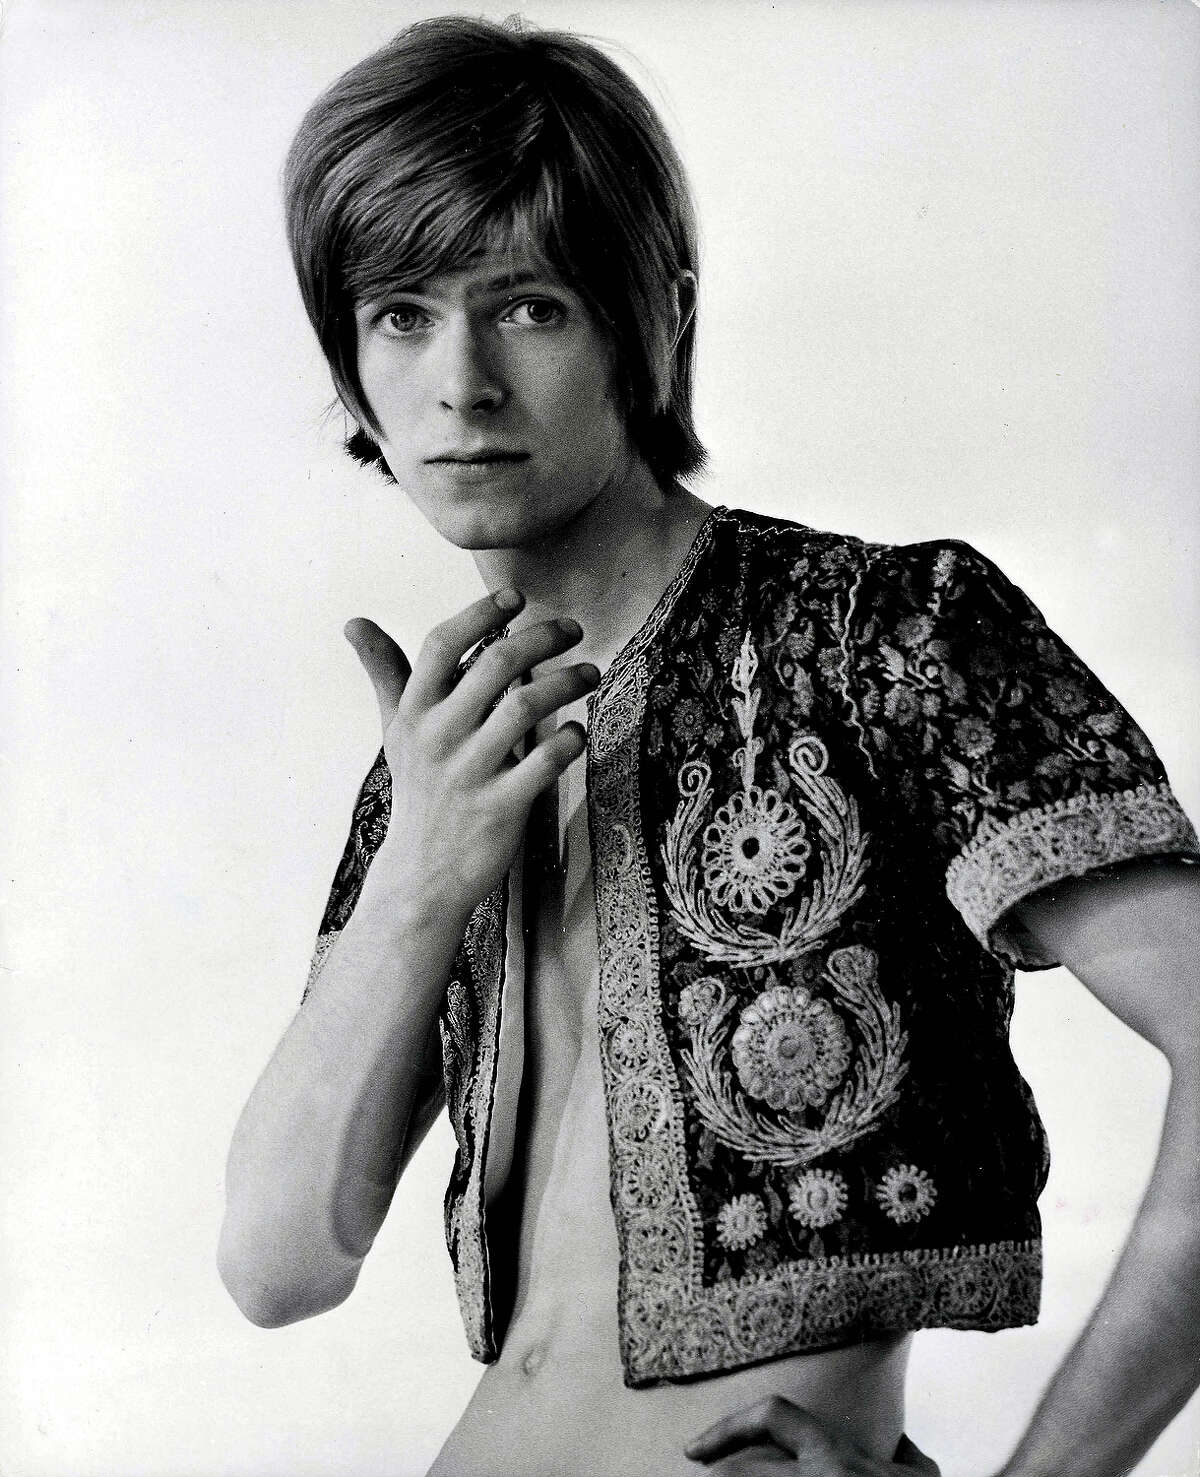 Singer and songwriter, David Bowie, circa 1970s.